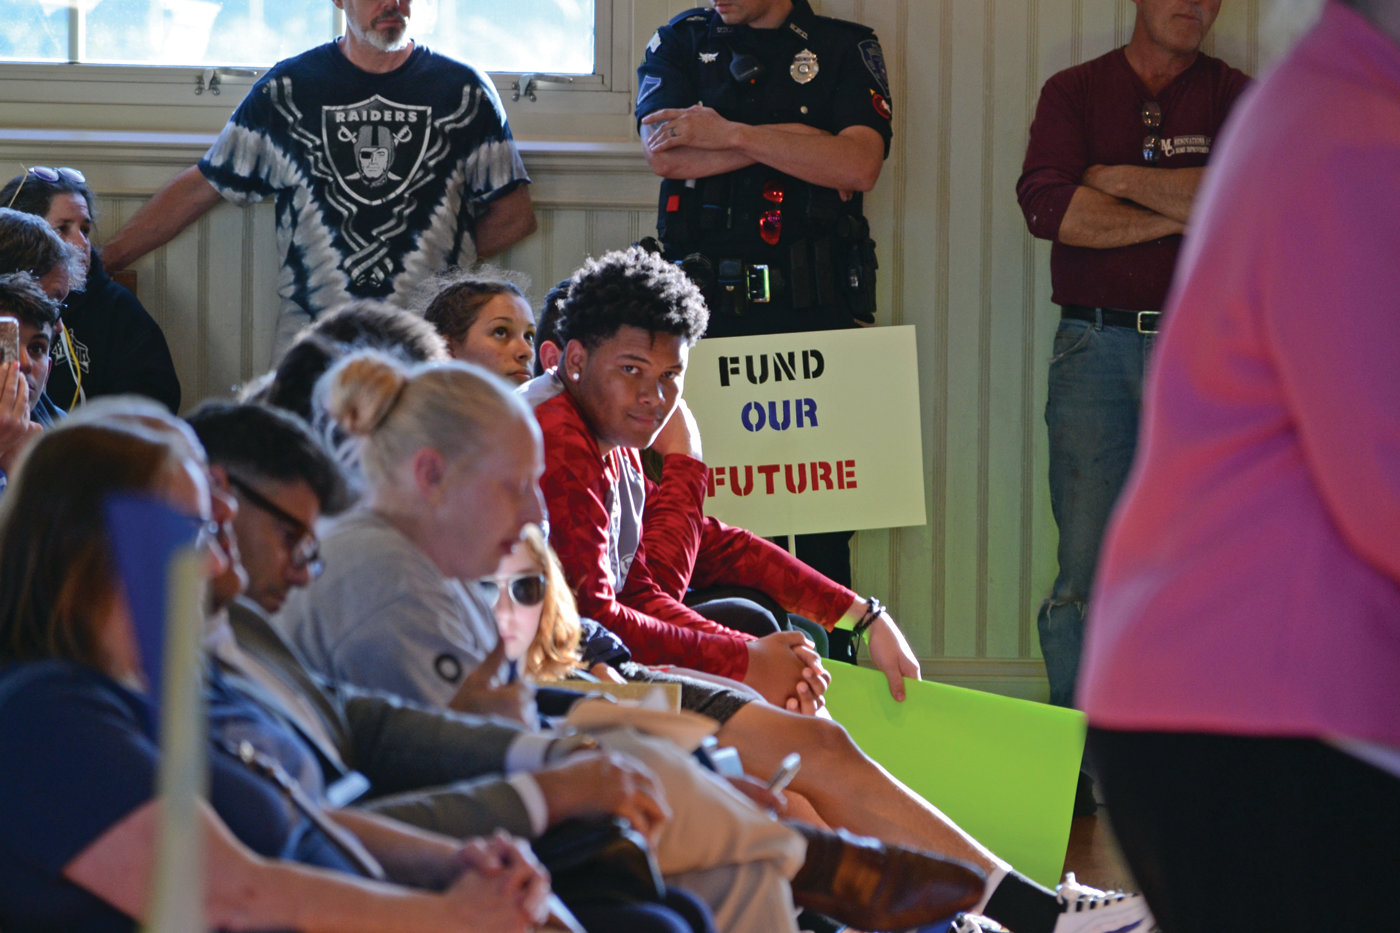 FUND OUR FUTURE: Another protest sign asked legislators to provide more funding to the Warwick School Department.